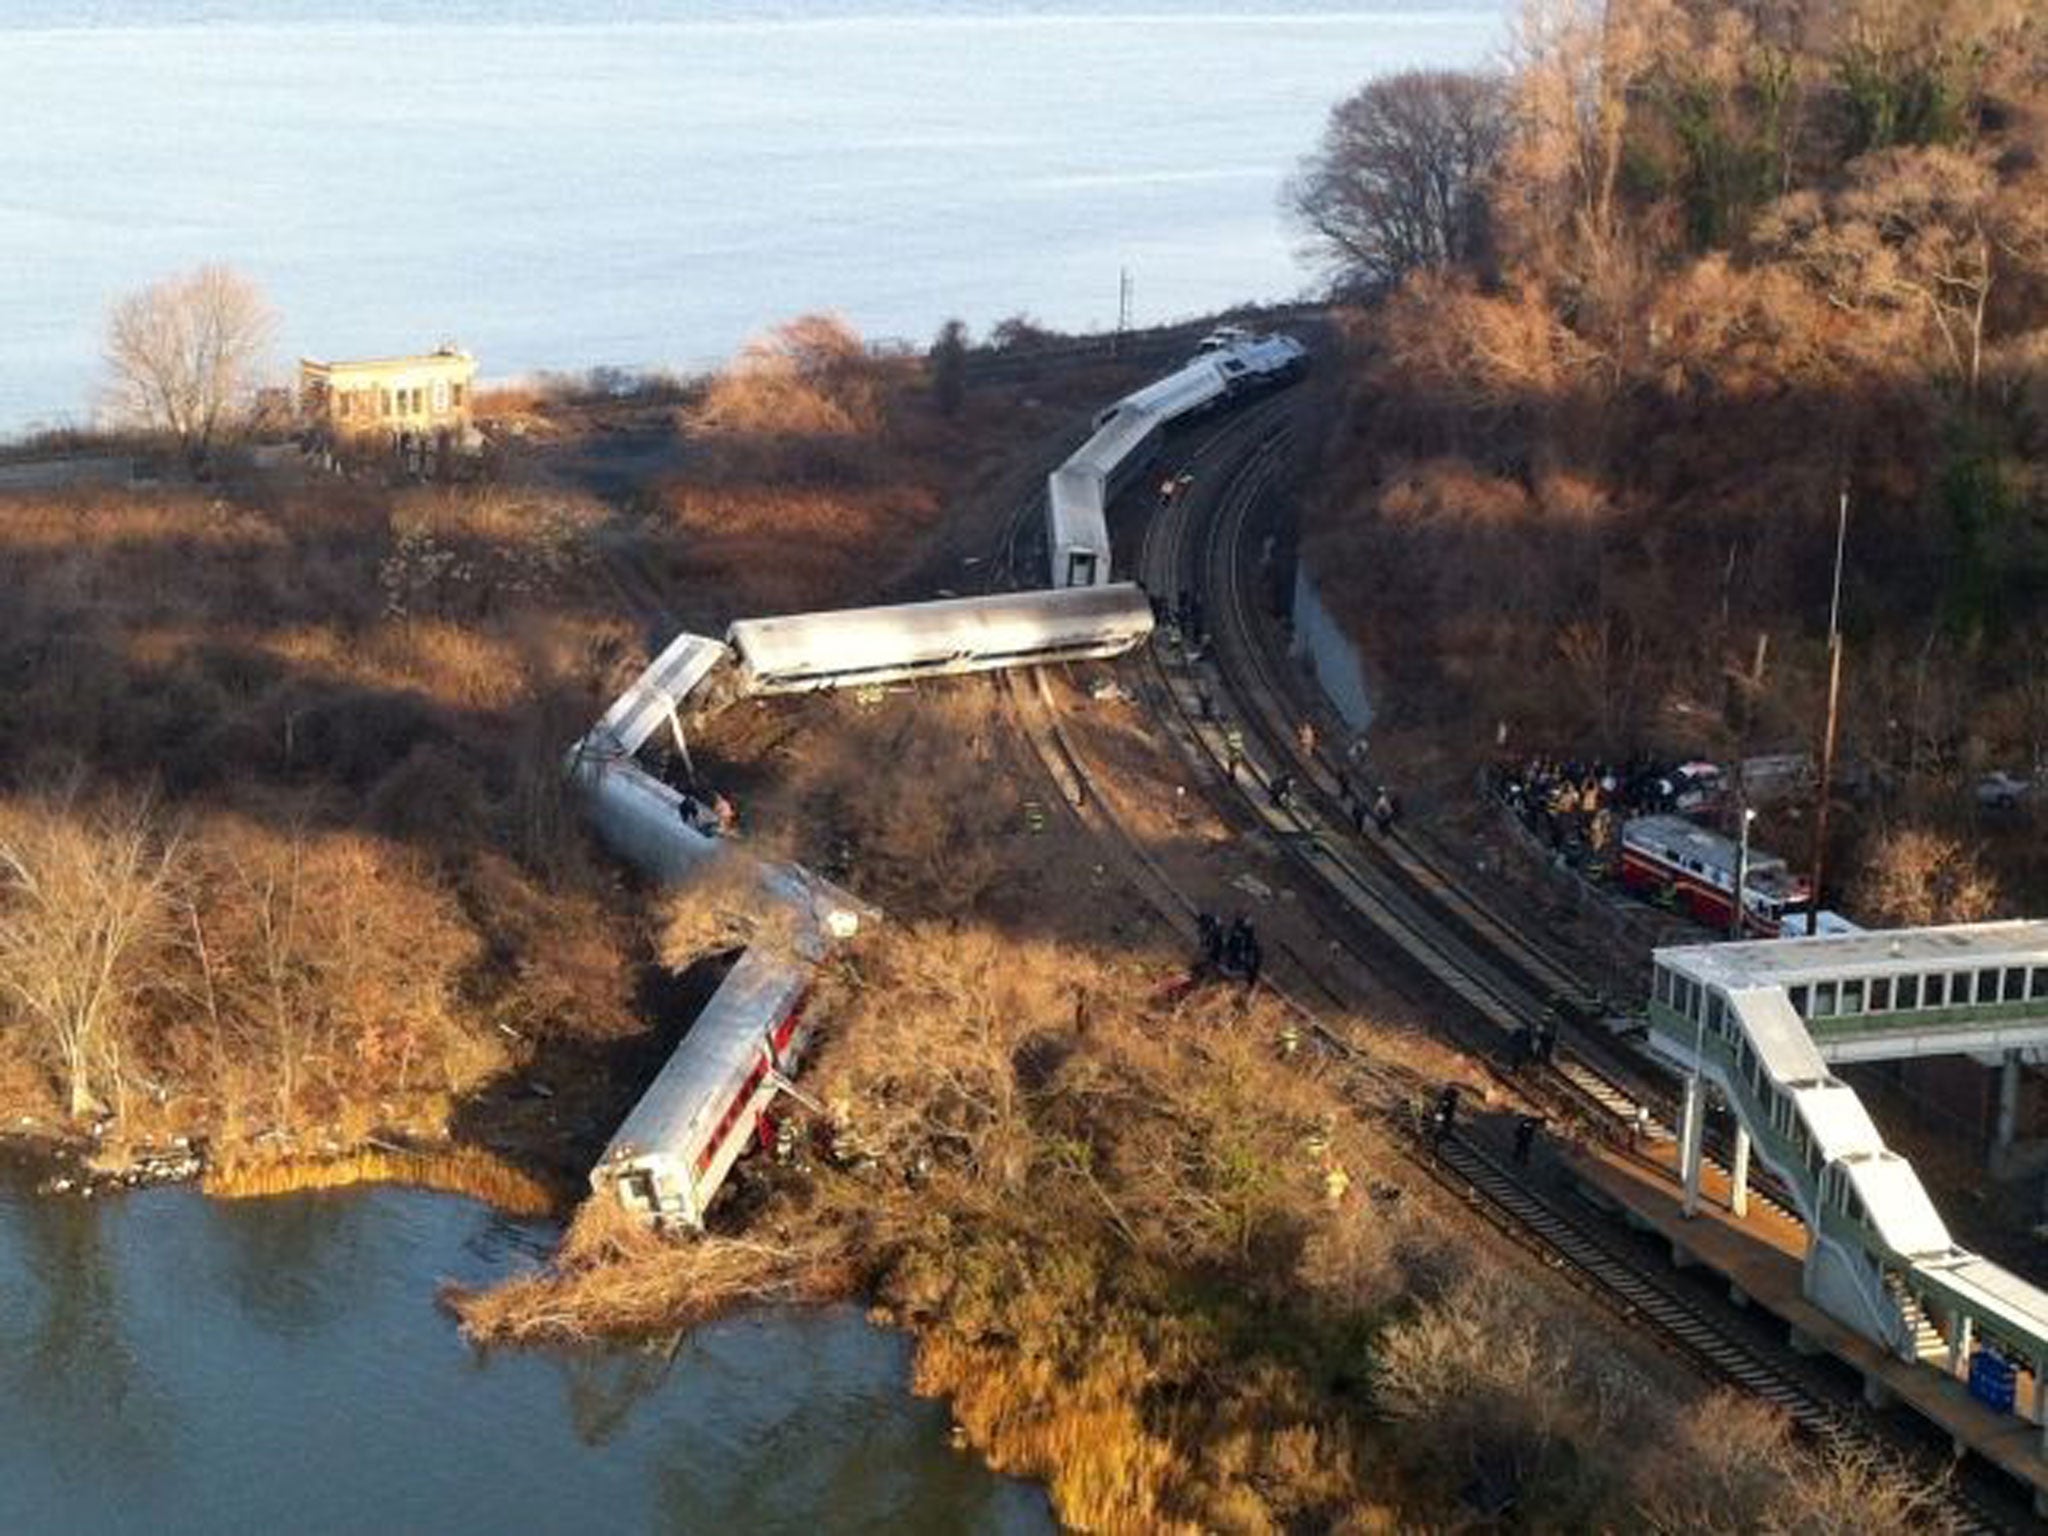 Cars from a Metro-North passenger train are scattered after the train derailed in the Bronx neighborhood of New York